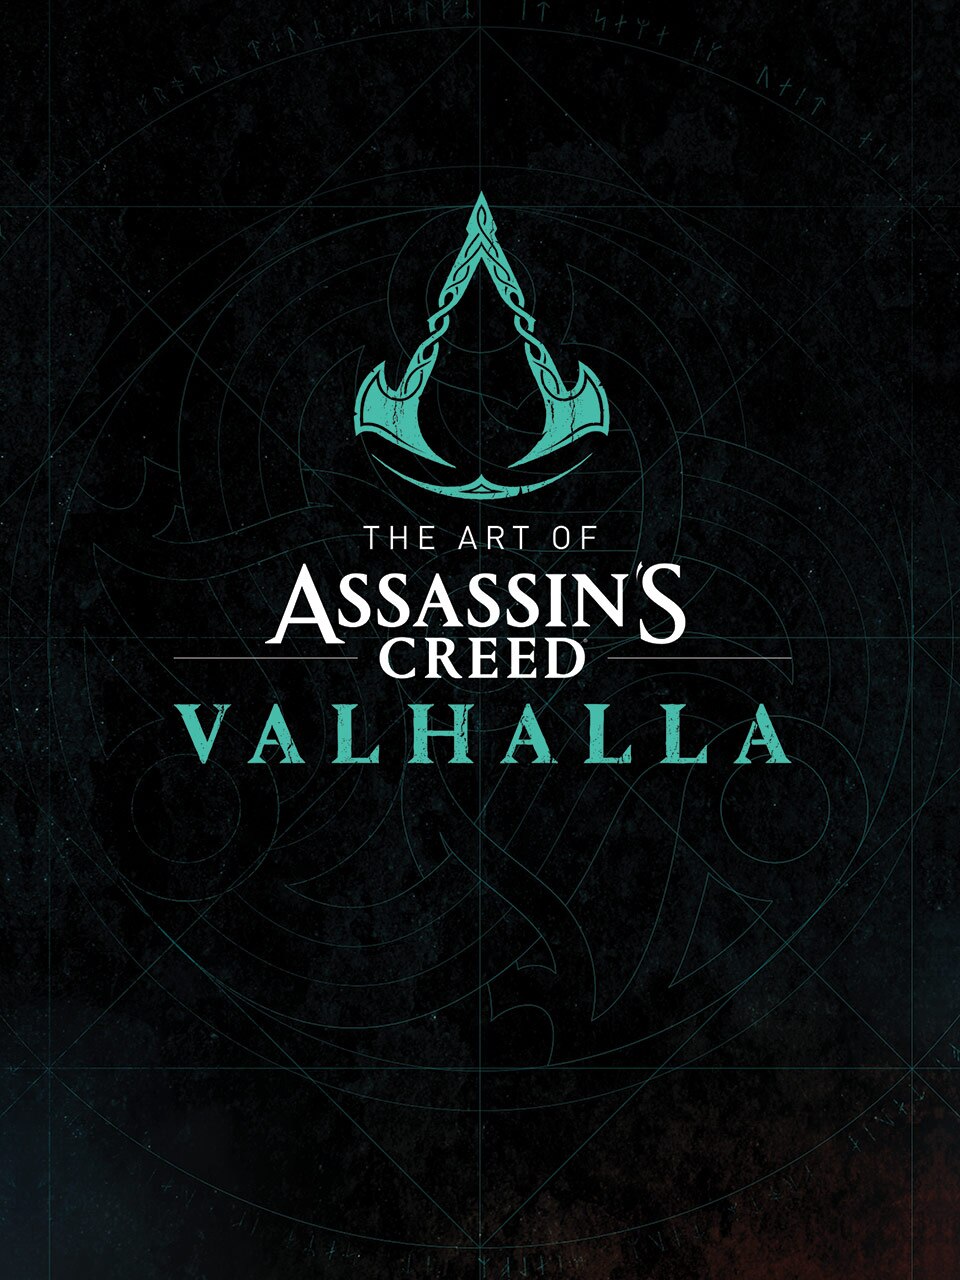 [UN] [News] The Art of Assassin’s Creed Valhalla Book Coming Holiday 2020 - Cover